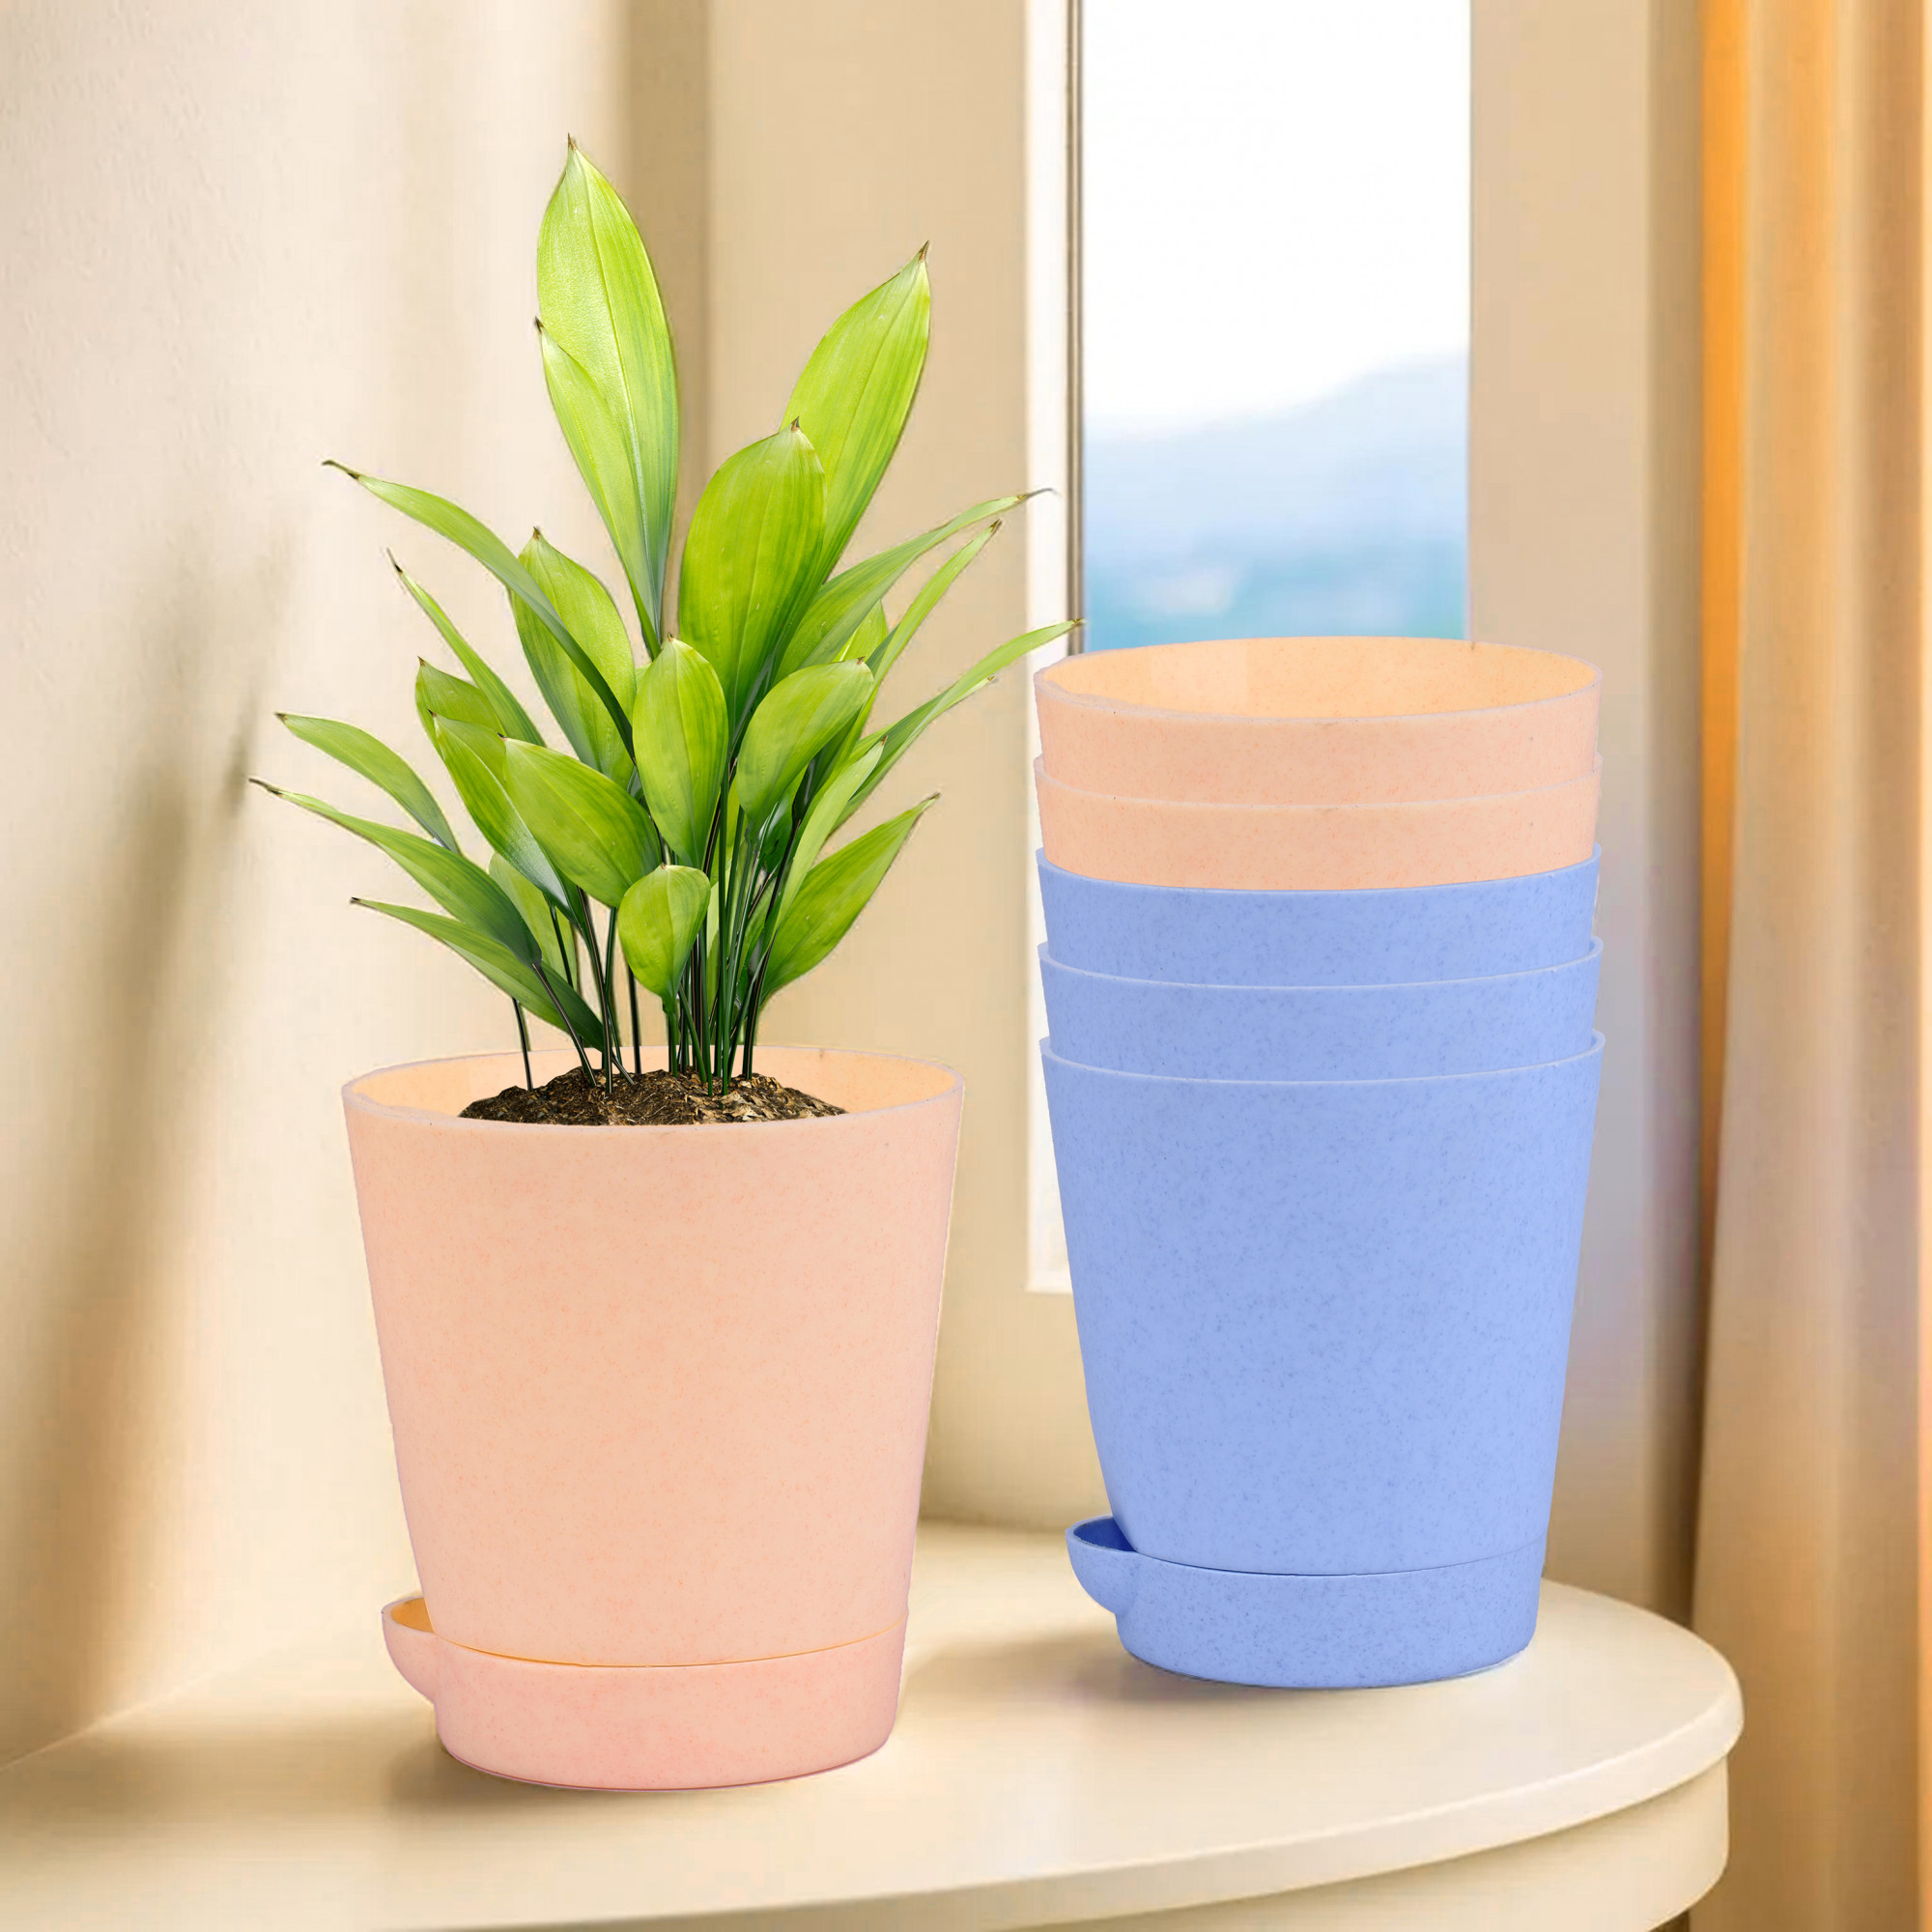 Kuber Industries Flower Pot | Flower Pot for Living Room-Office | Planters for Home-office-Lawns & Garden Décor | Self Watering Flower Planters Pots | Marble Titan | 4 Inch | Blue & Peach